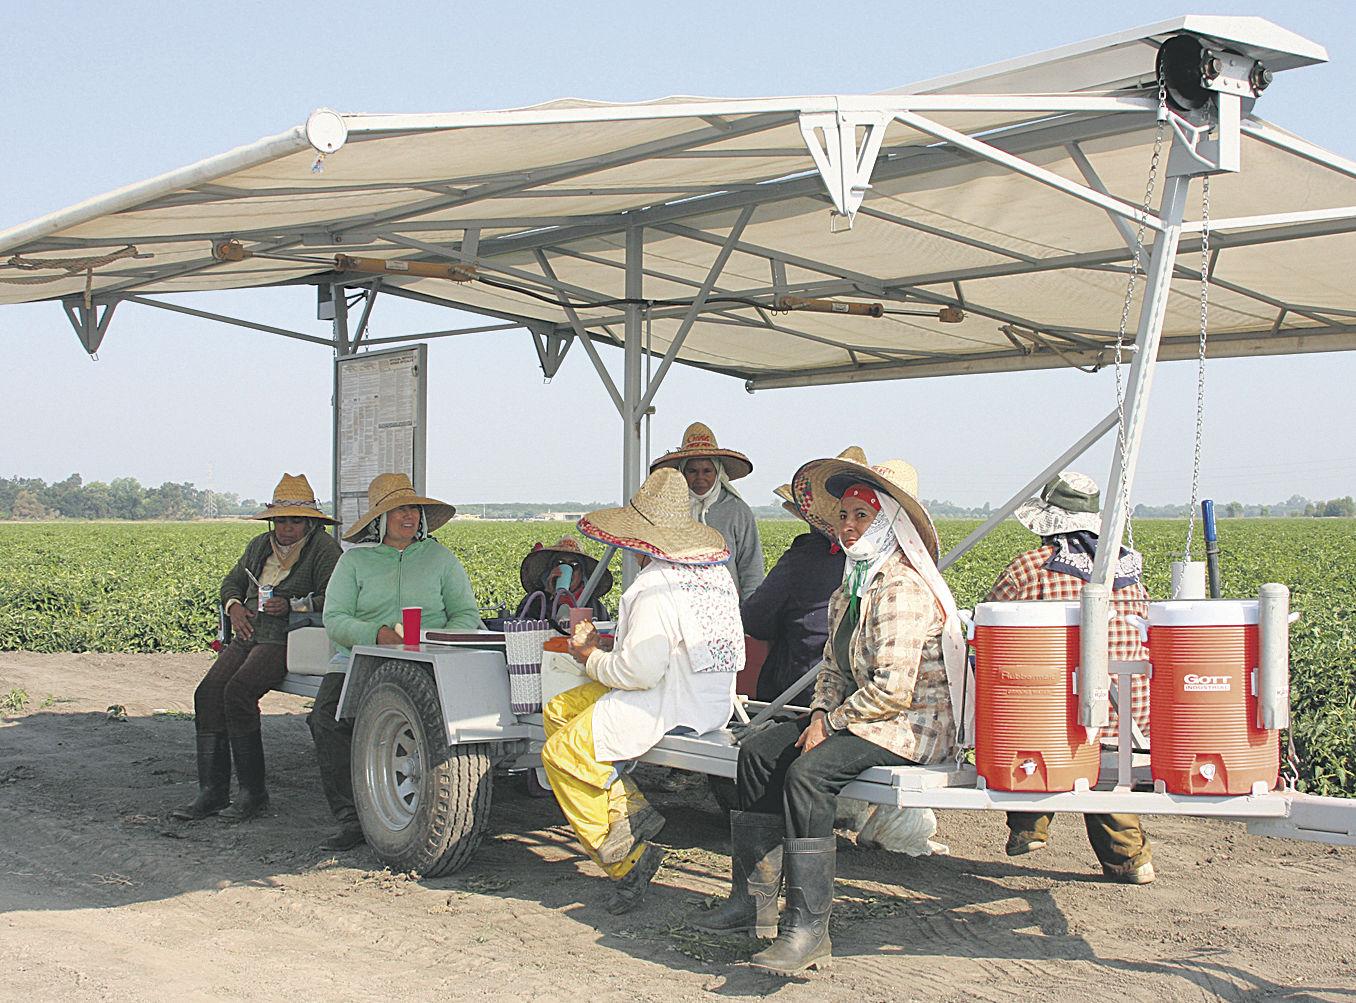 Farmworkers seated in a mobile shade station taking a break.